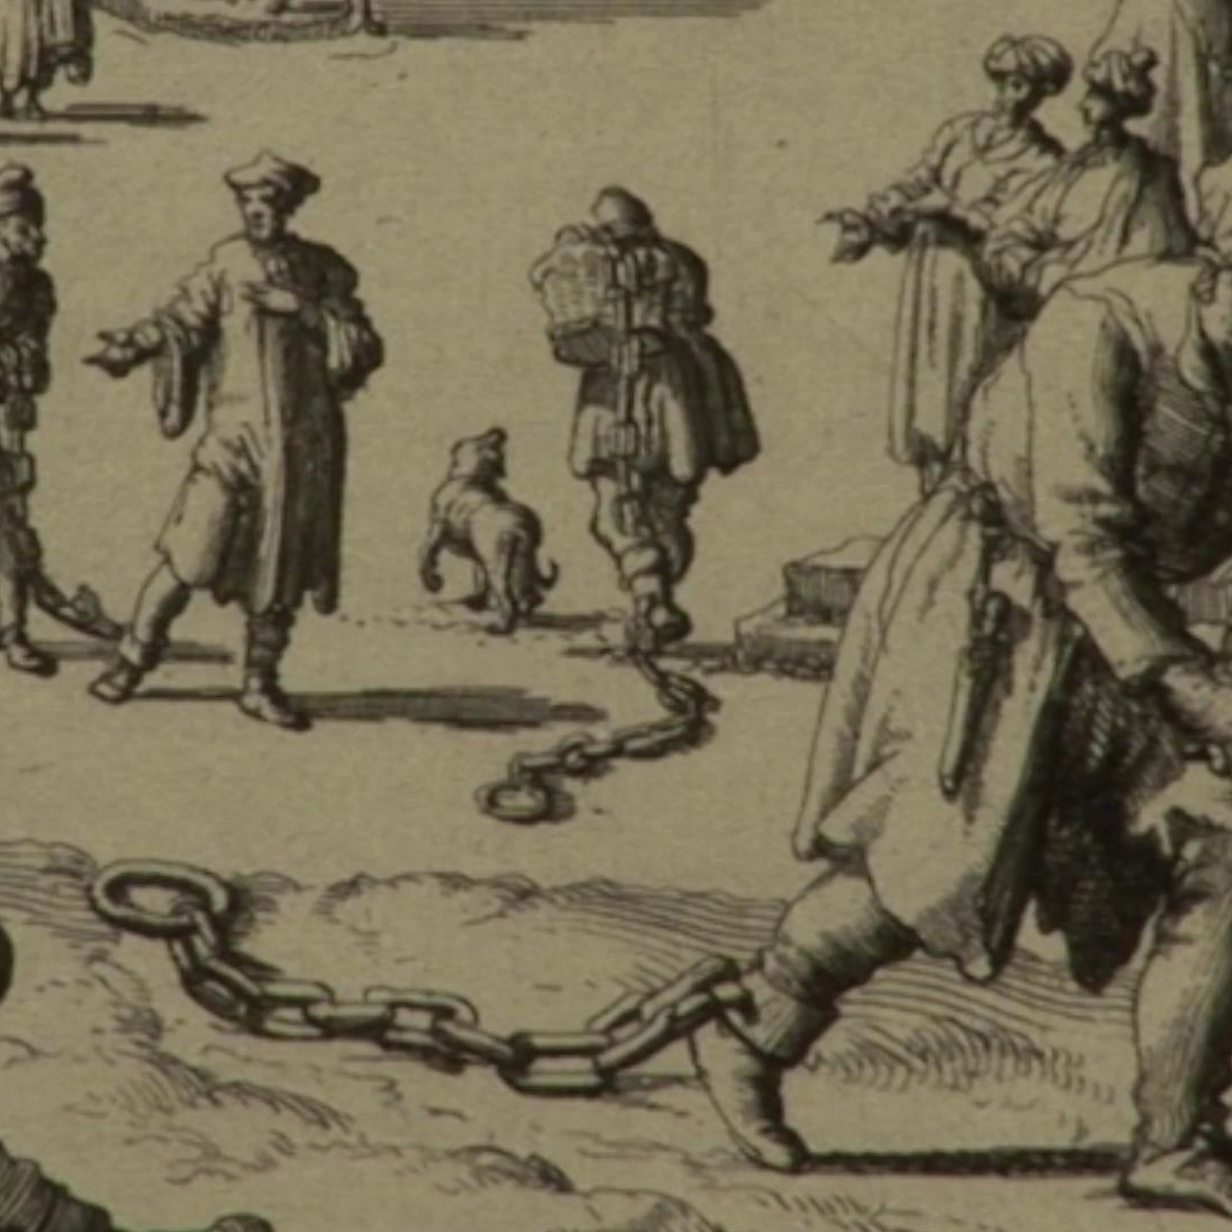 Barbary piracy that enslaved thousands 'culturally erased' - BBC